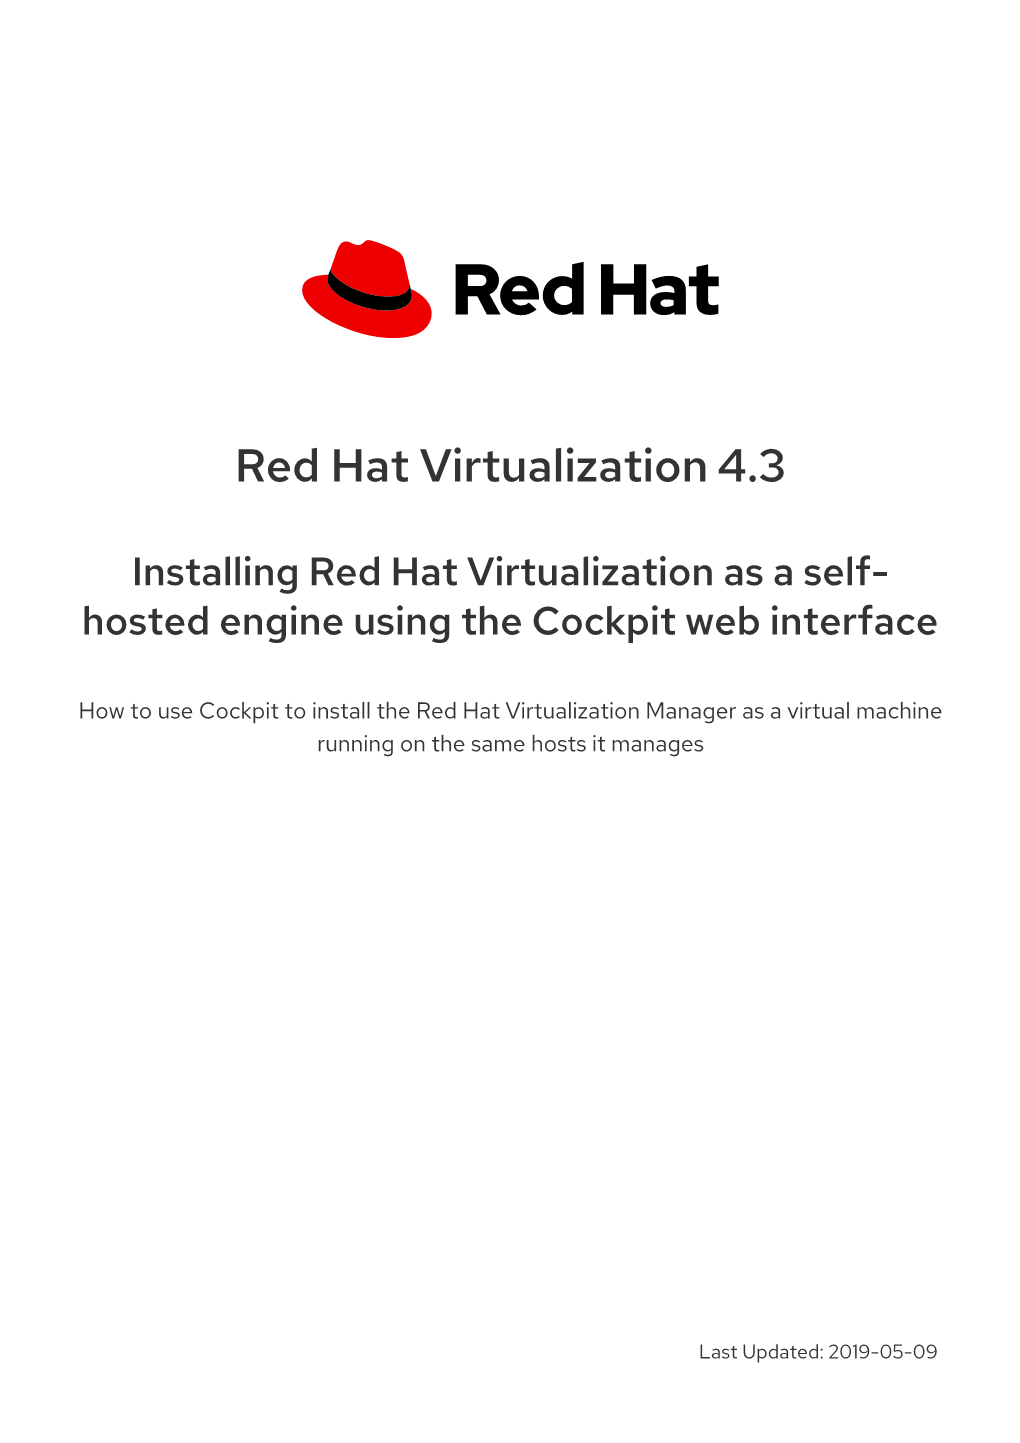 Installing Red Hat Virtualization As a Self- Hosted Engine Using the Cockpit Web Interface